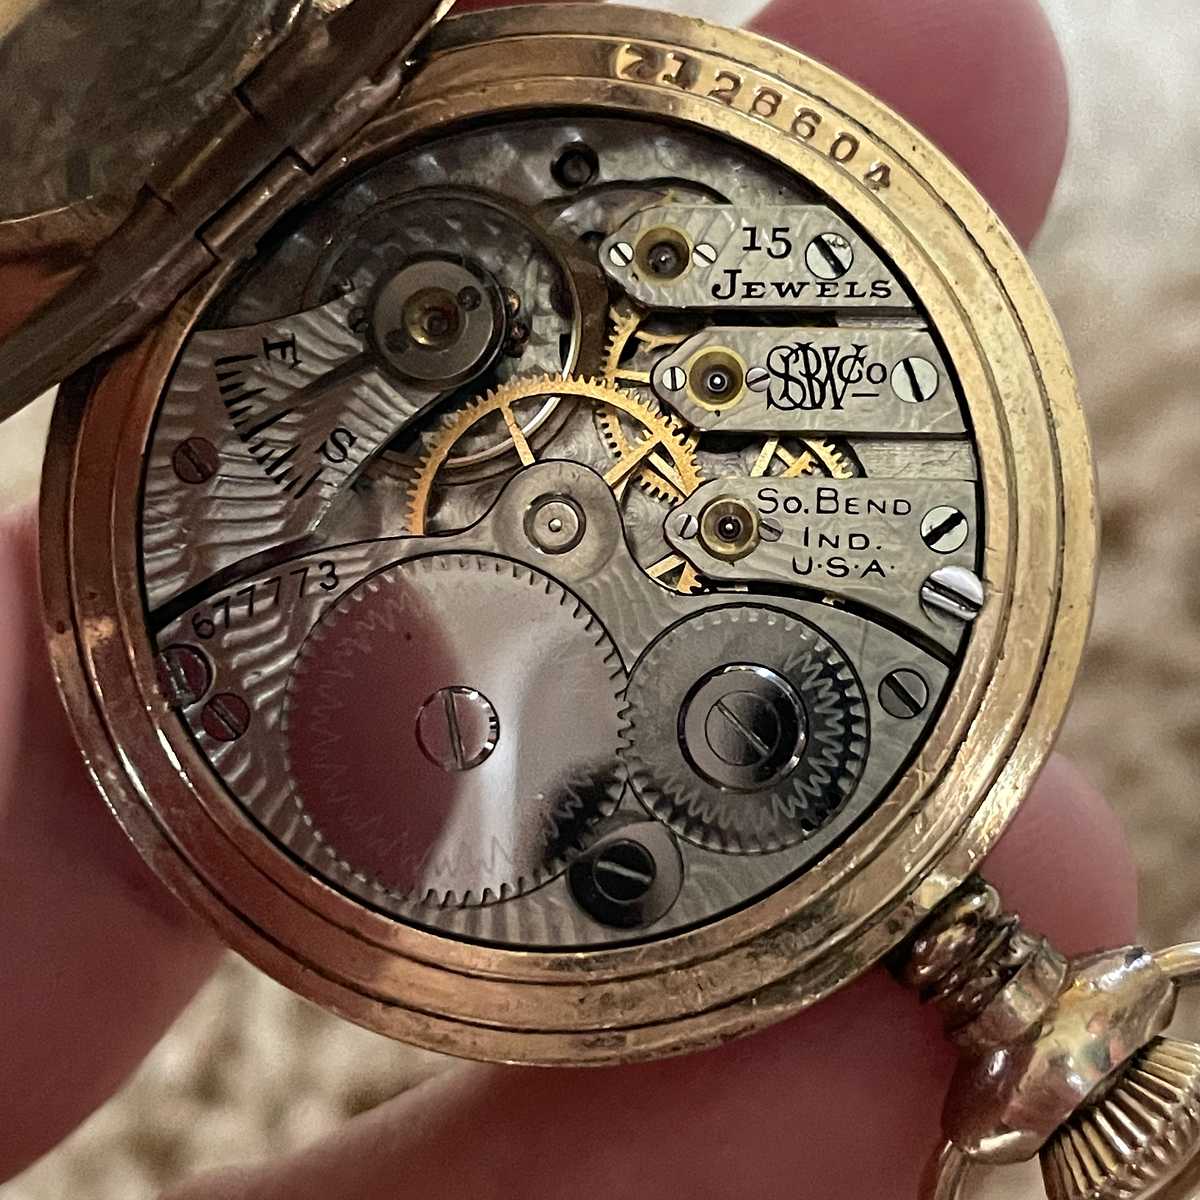 1911 South Bend Watch Grade 110 Movement in pocket watch case